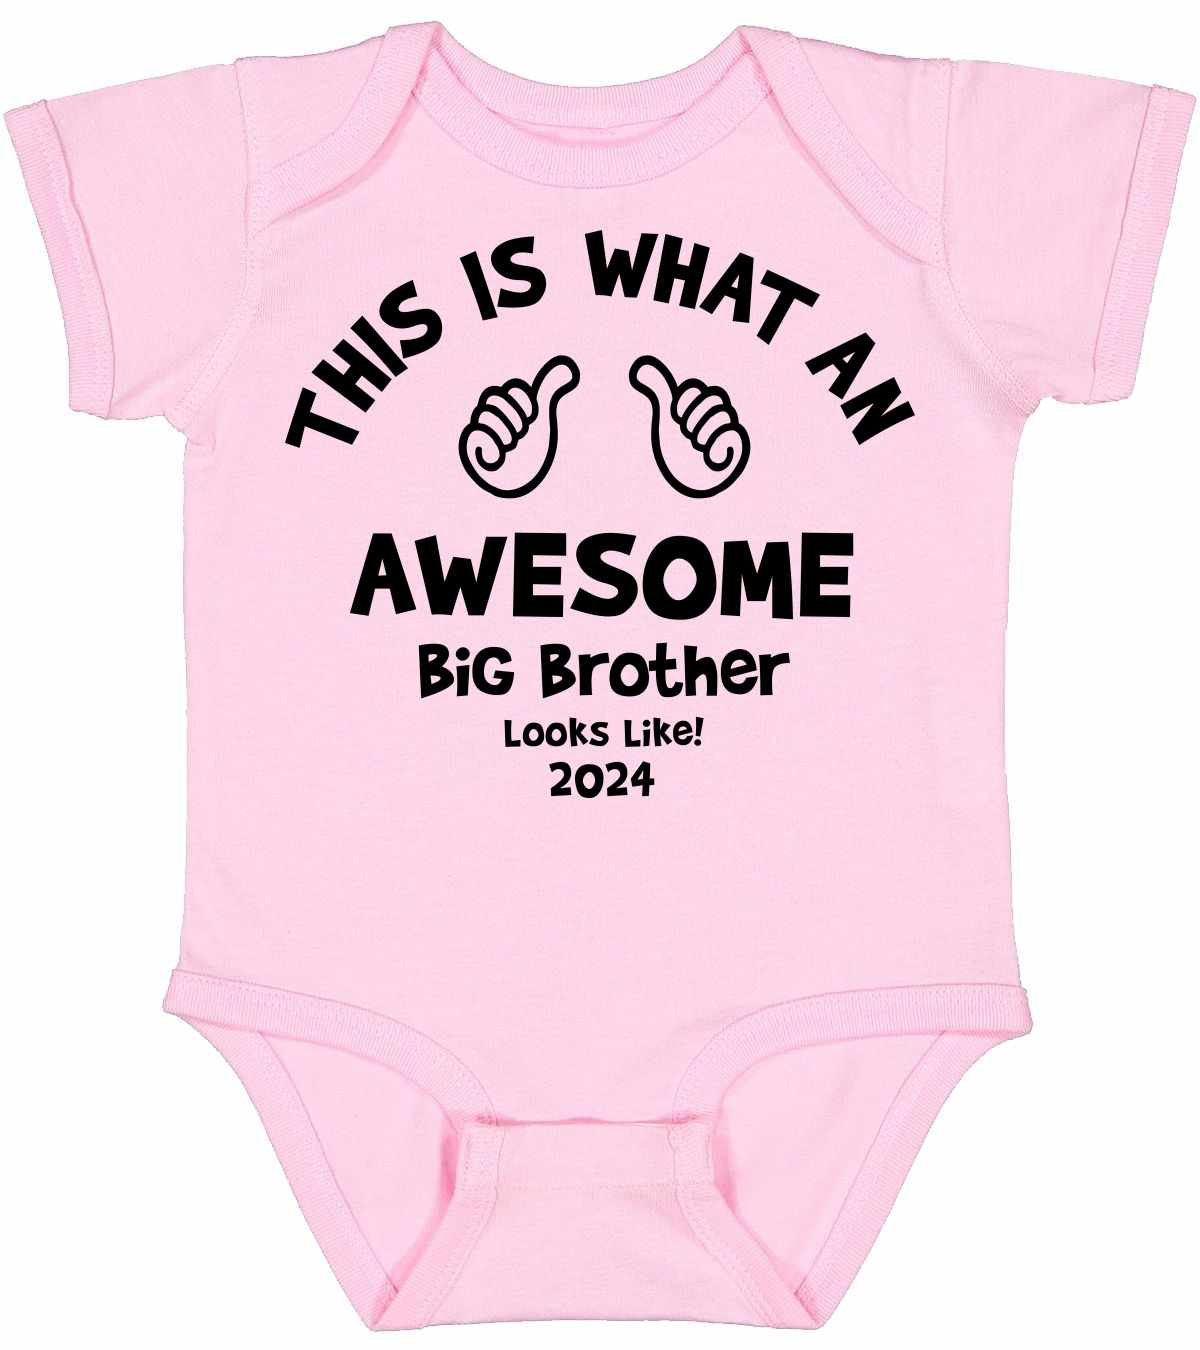 Awesome Big Brother in 2024 on Infant BodySuit (#1363-10)